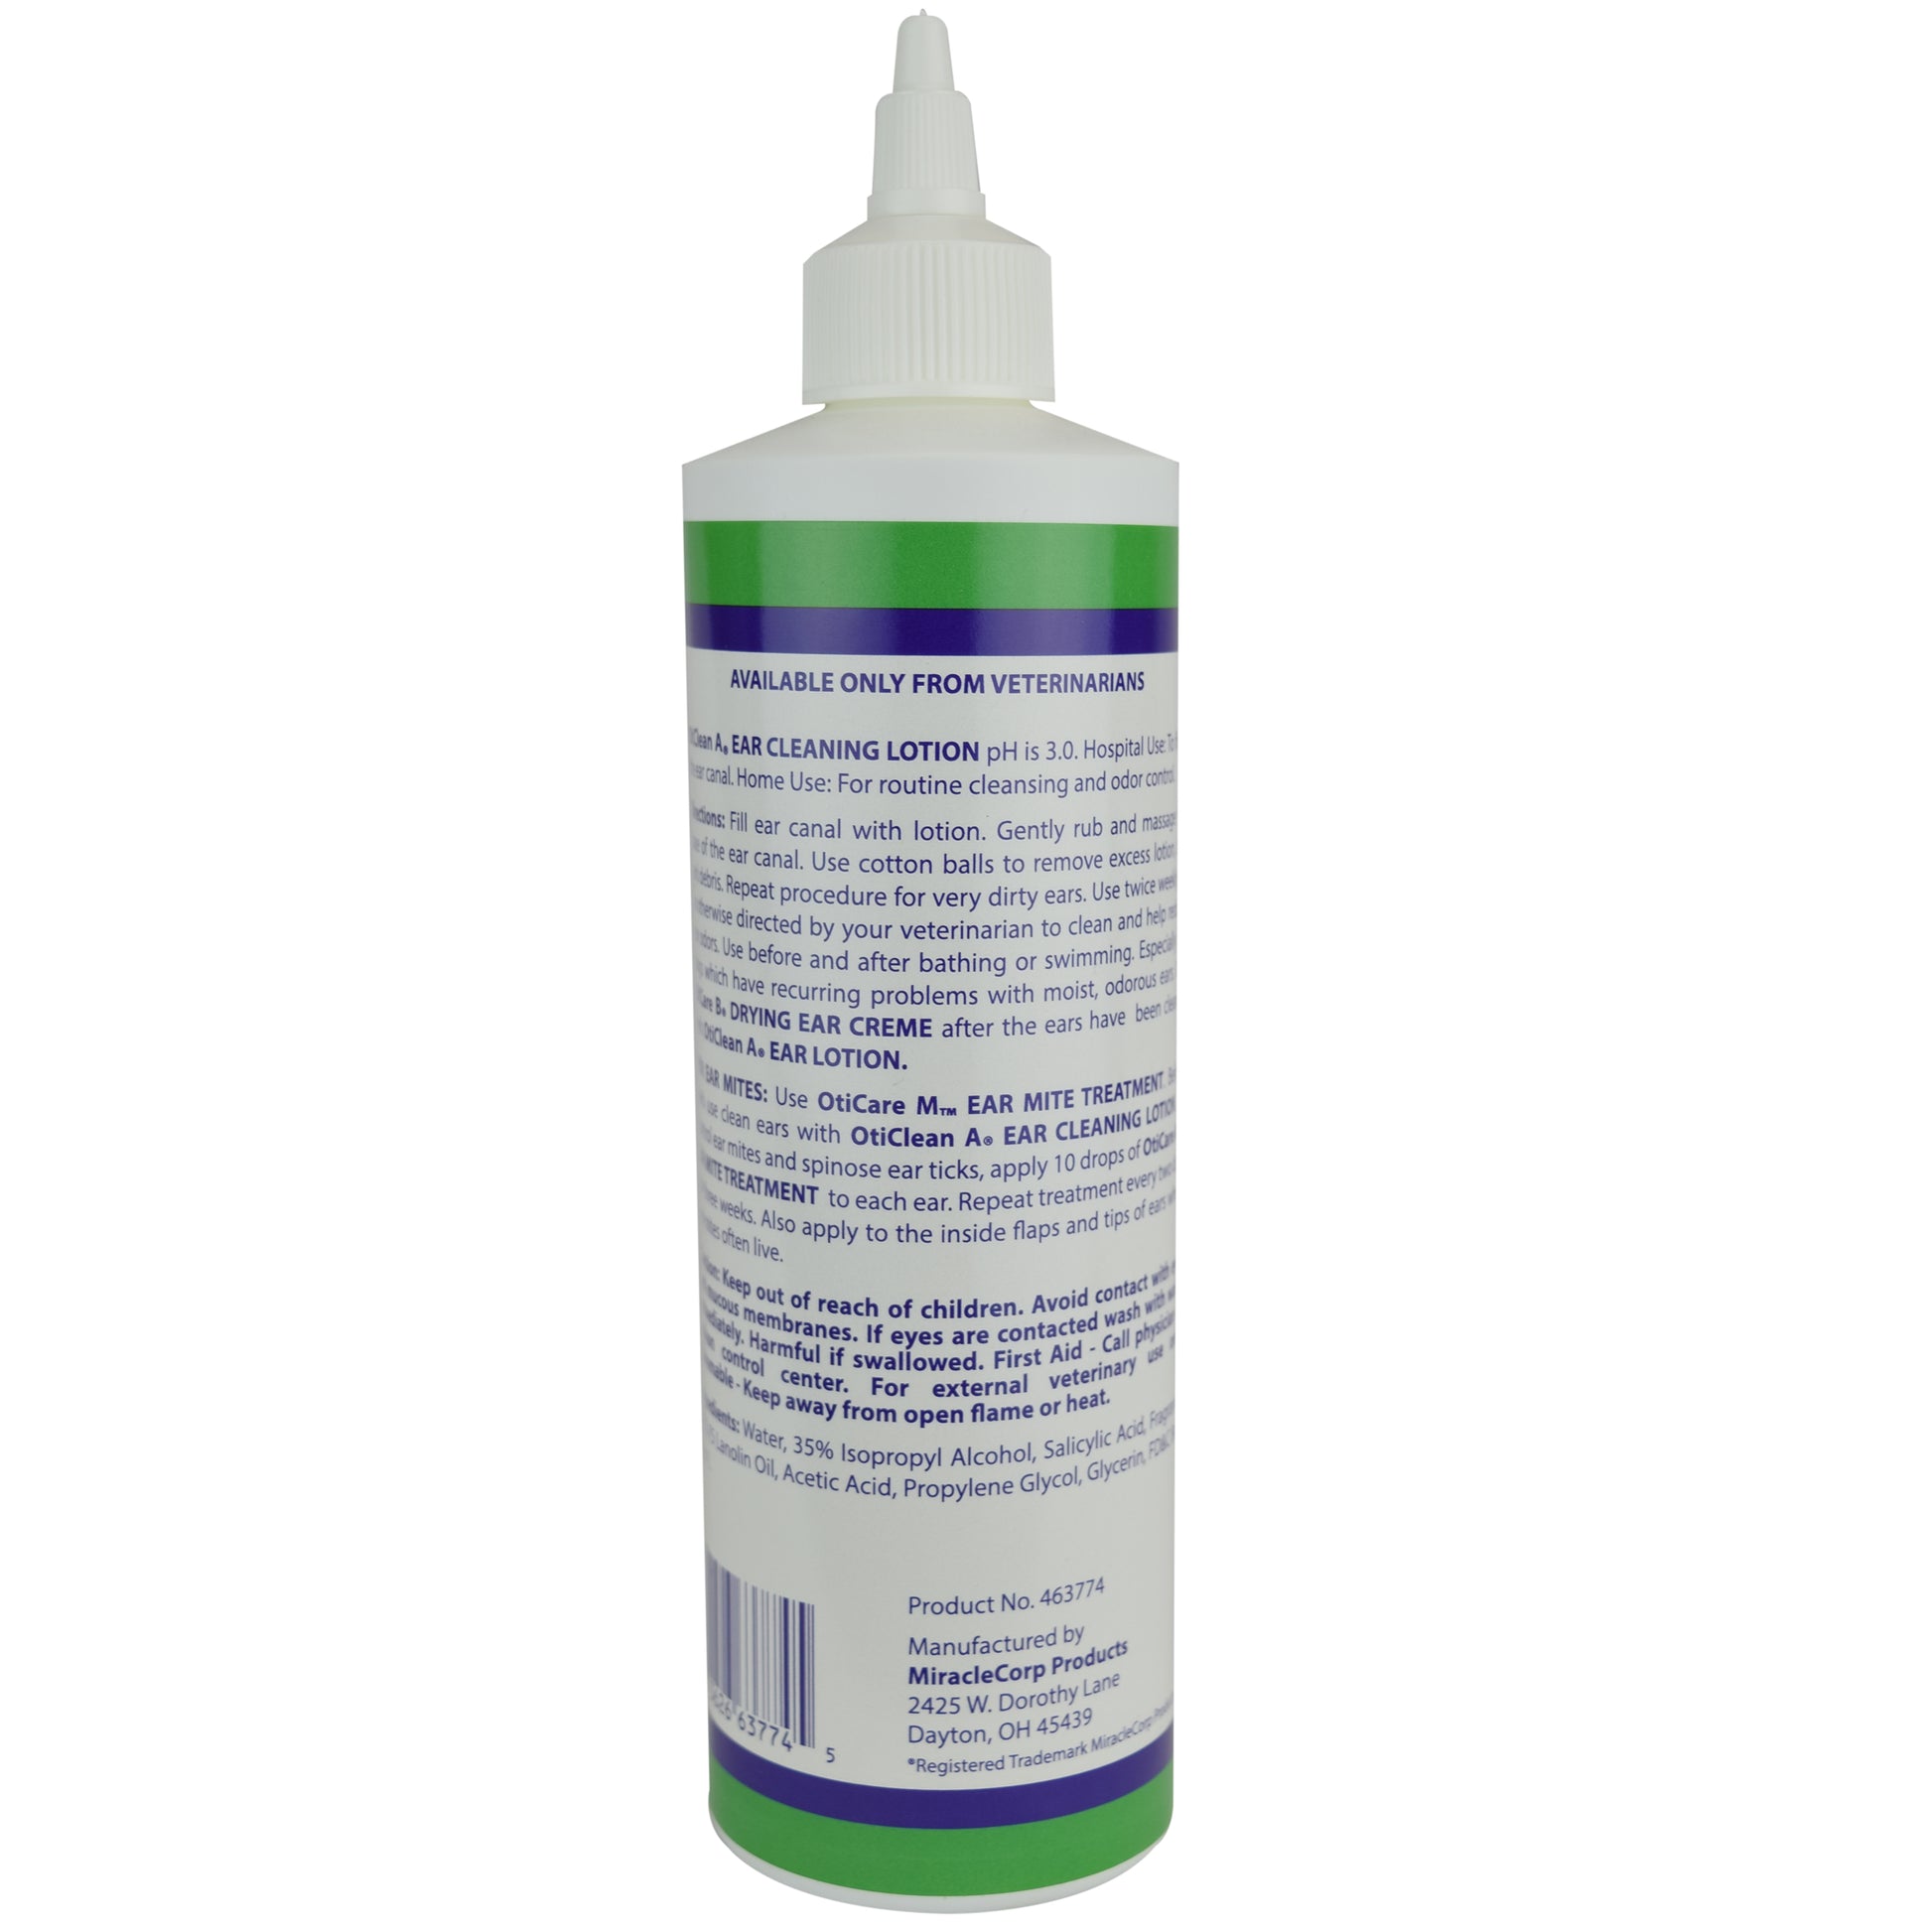 ARC Laboratories' OtiClean-A Ear Cleaning Solution for Professional Pet Groomers assists in cleaning pets' ears. Using salicylic and benzoic acids with aloe vera and chamomile, it gently removes impacted wax and debris while preventing bacterial and fungal infections without antibiotics and corticosteroids.